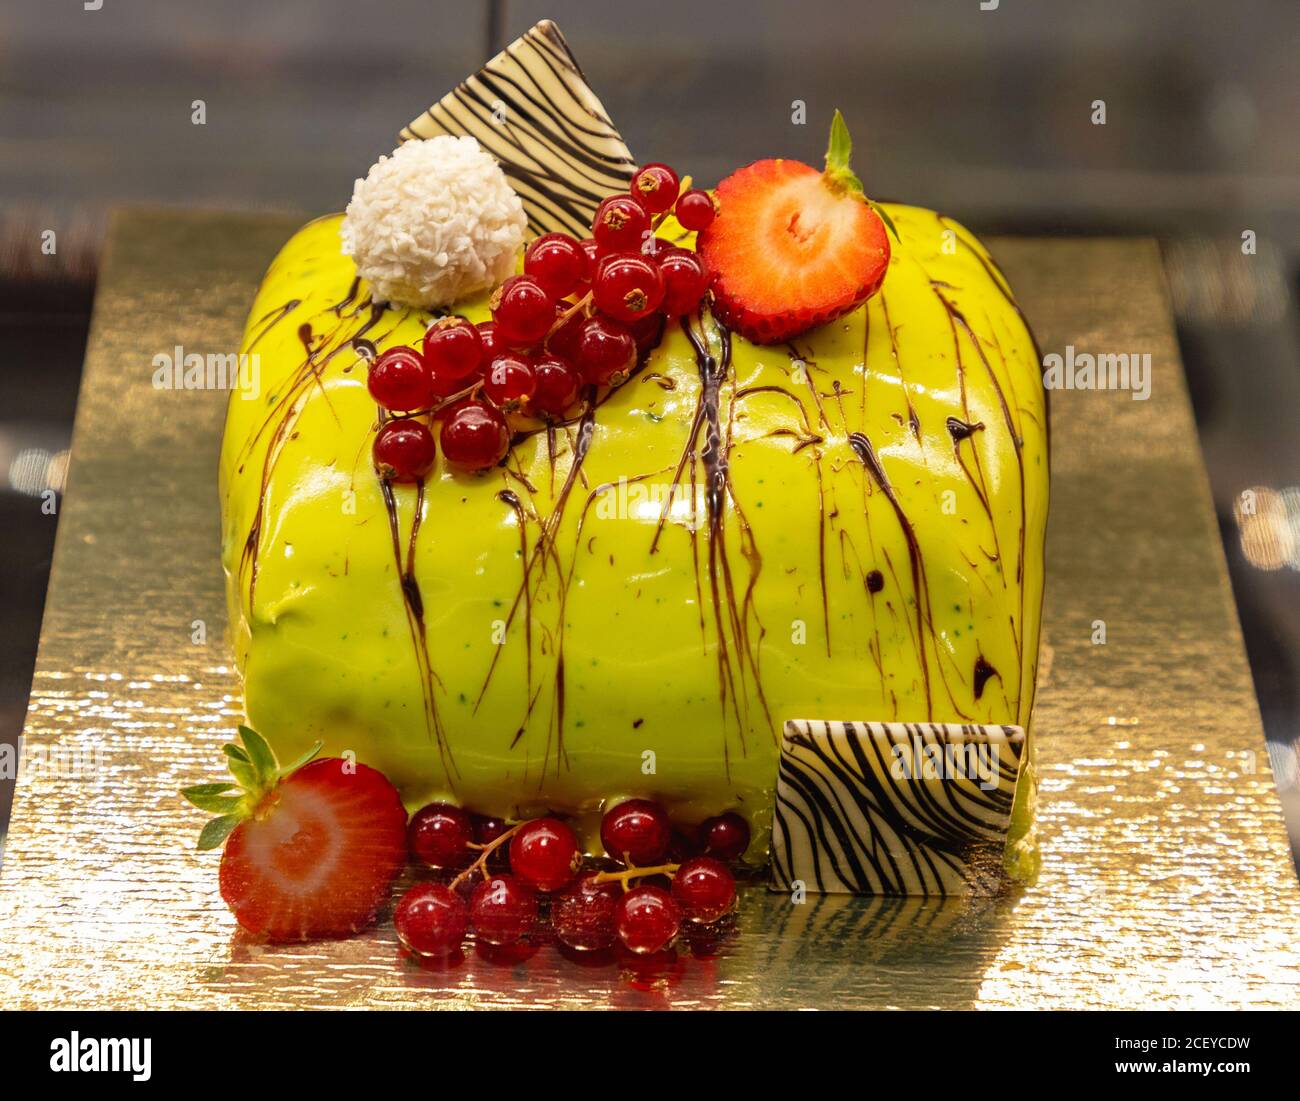 Culinary Art Green Cake With Berry Decor Stock Photo